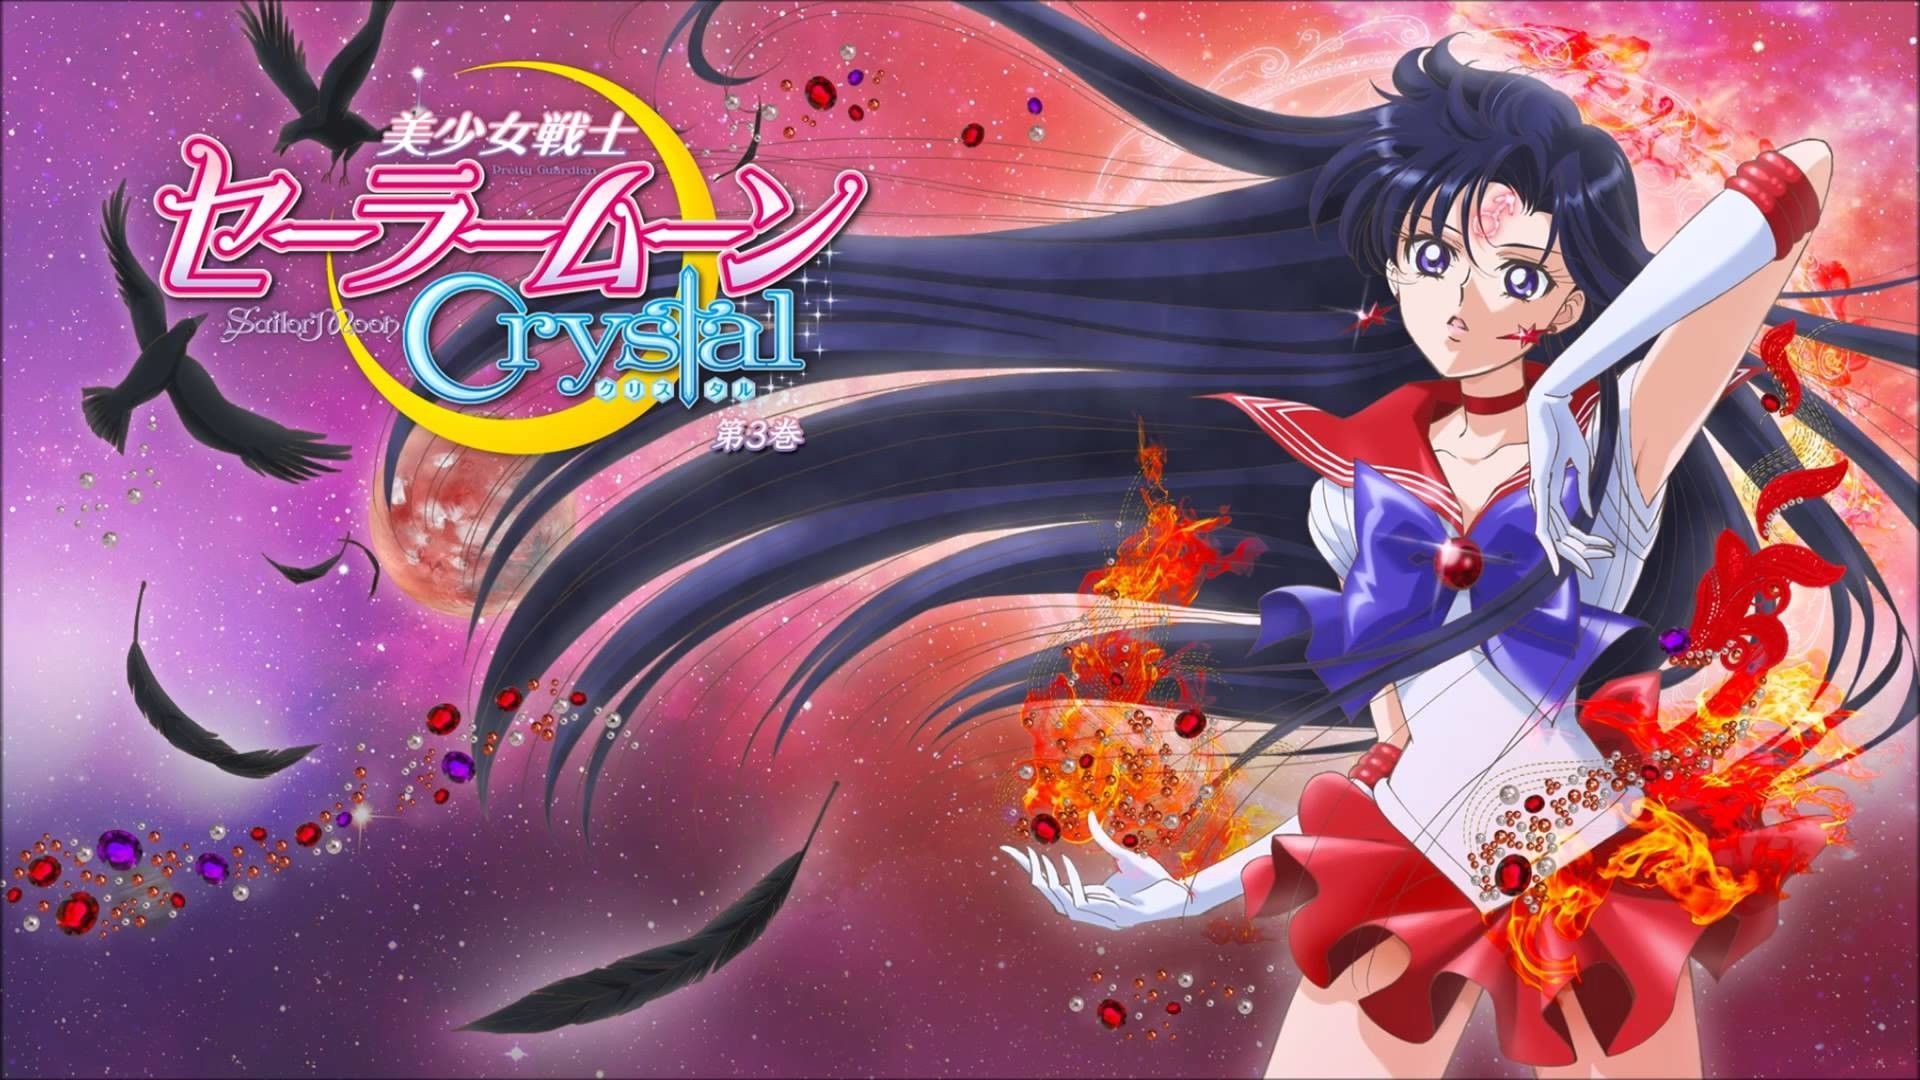 The anime girl is holding a sword and standing in front of some birds - Sailor Mars